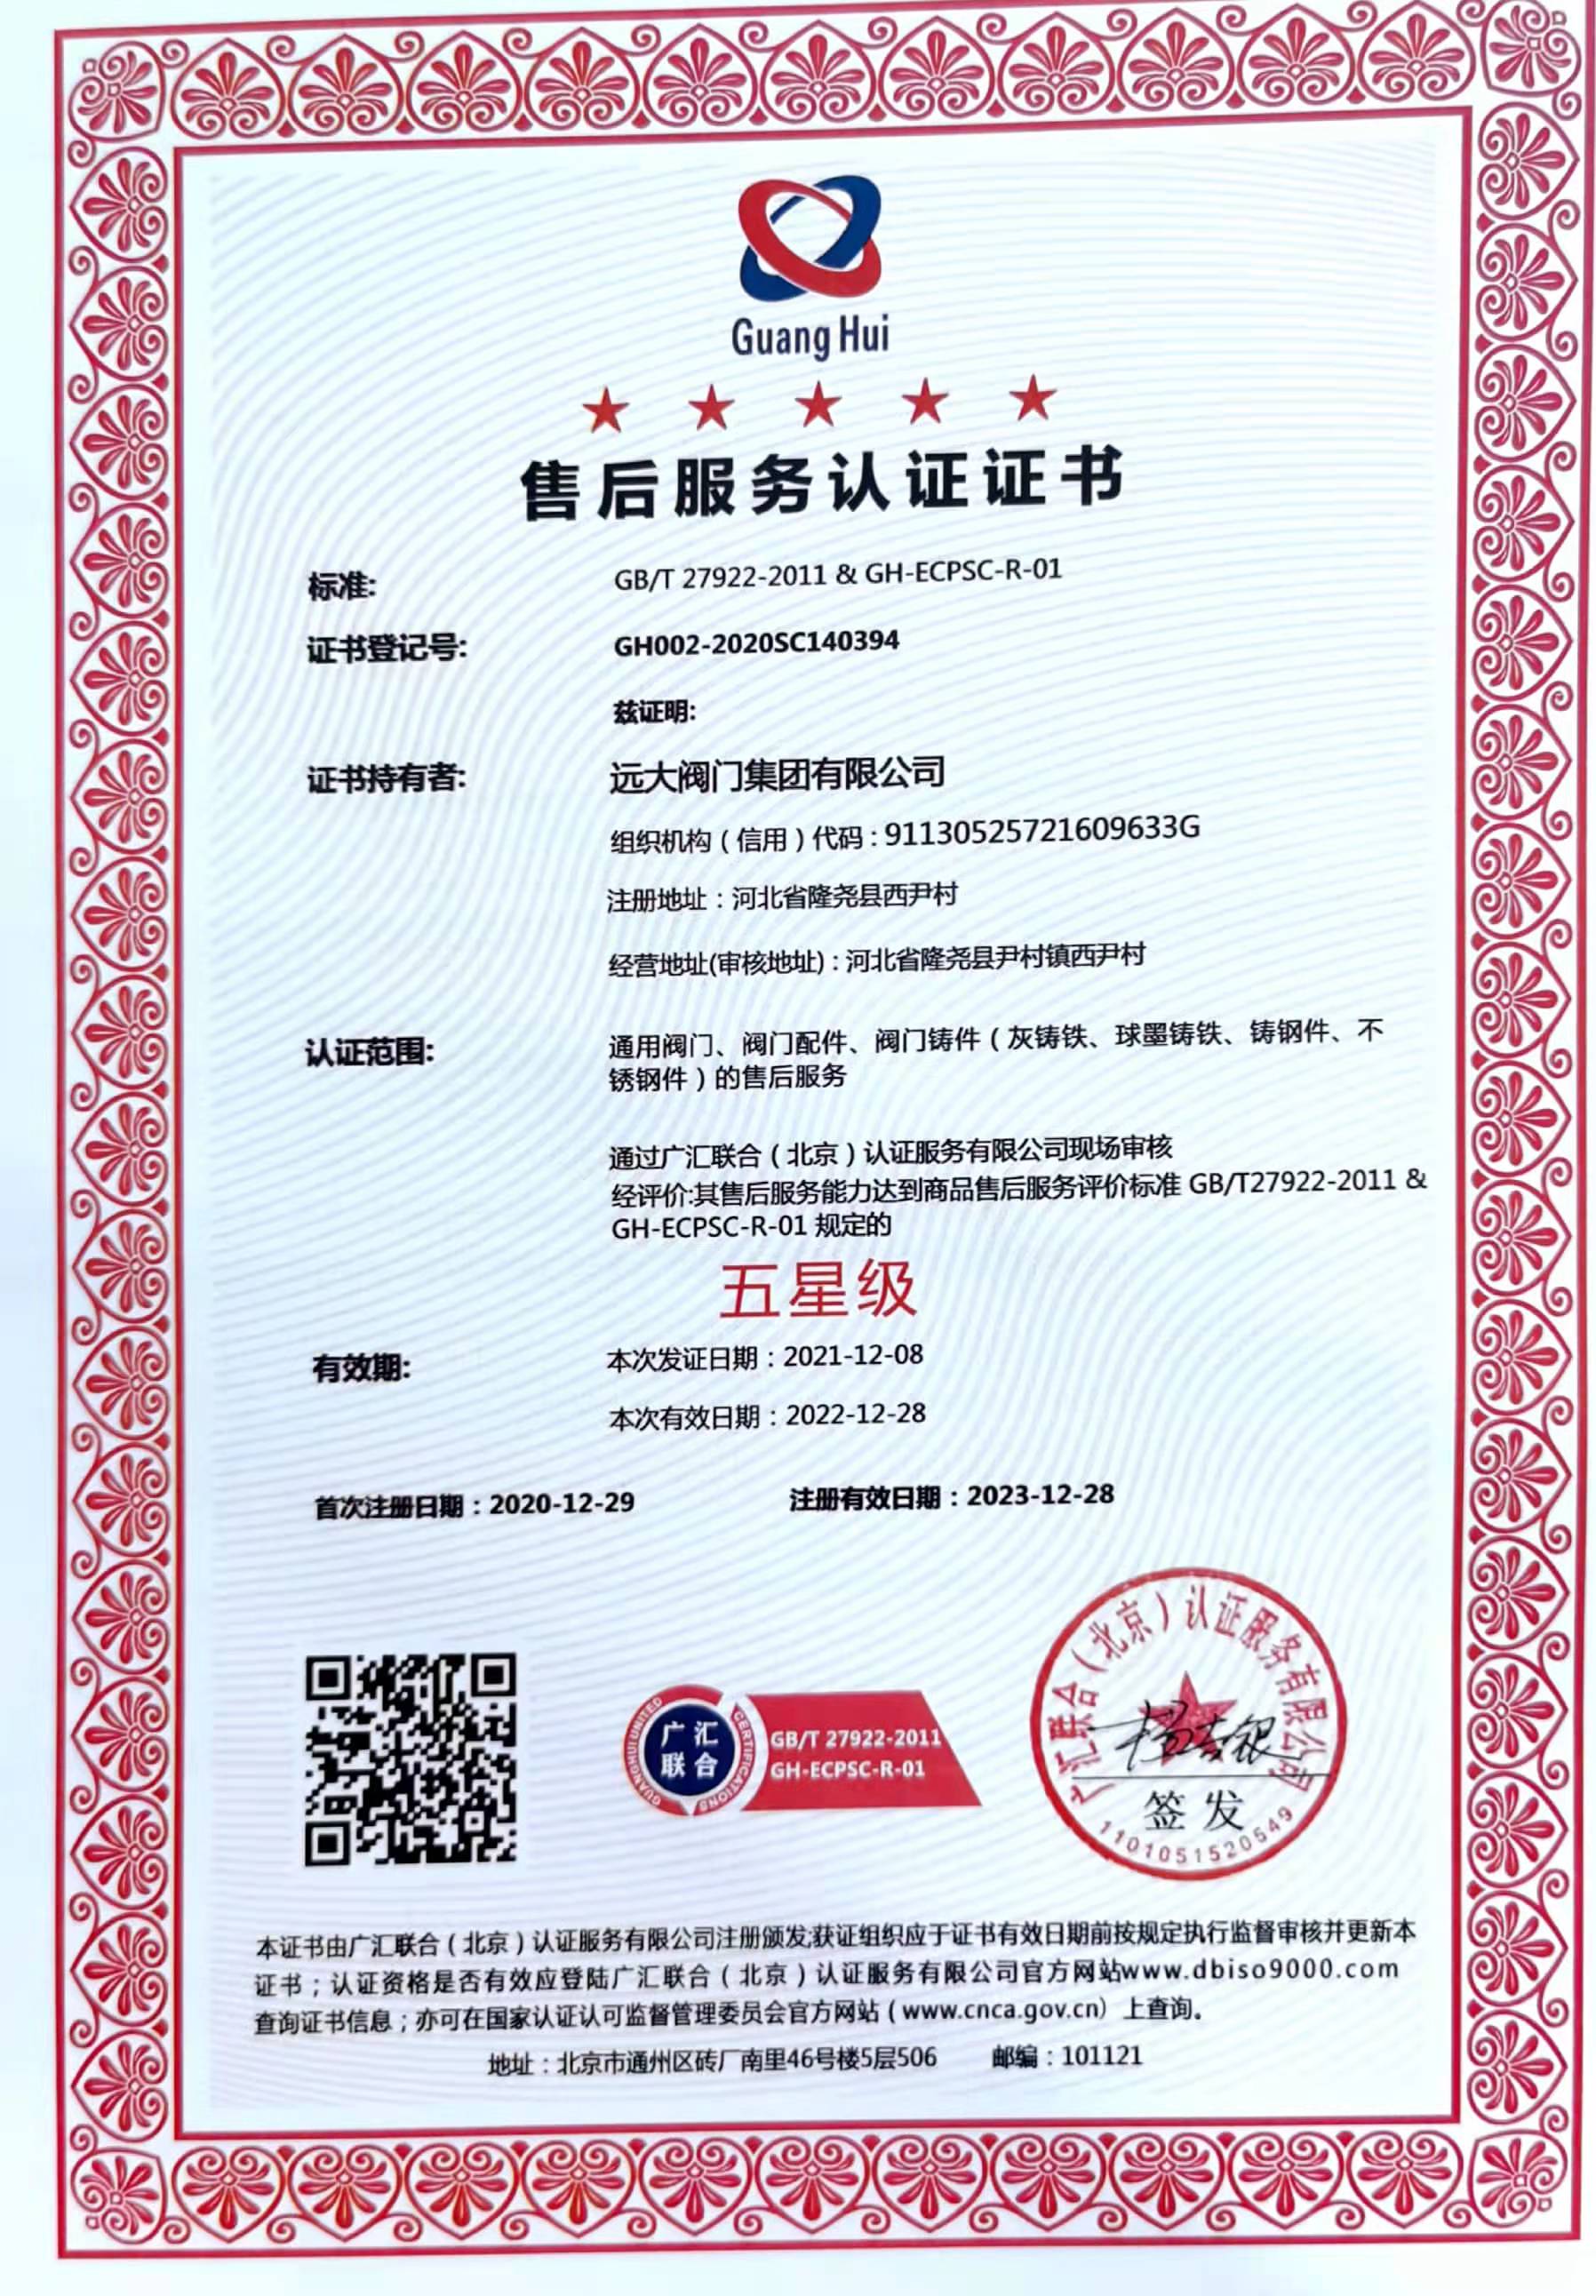 Five -star after -sales service certificate